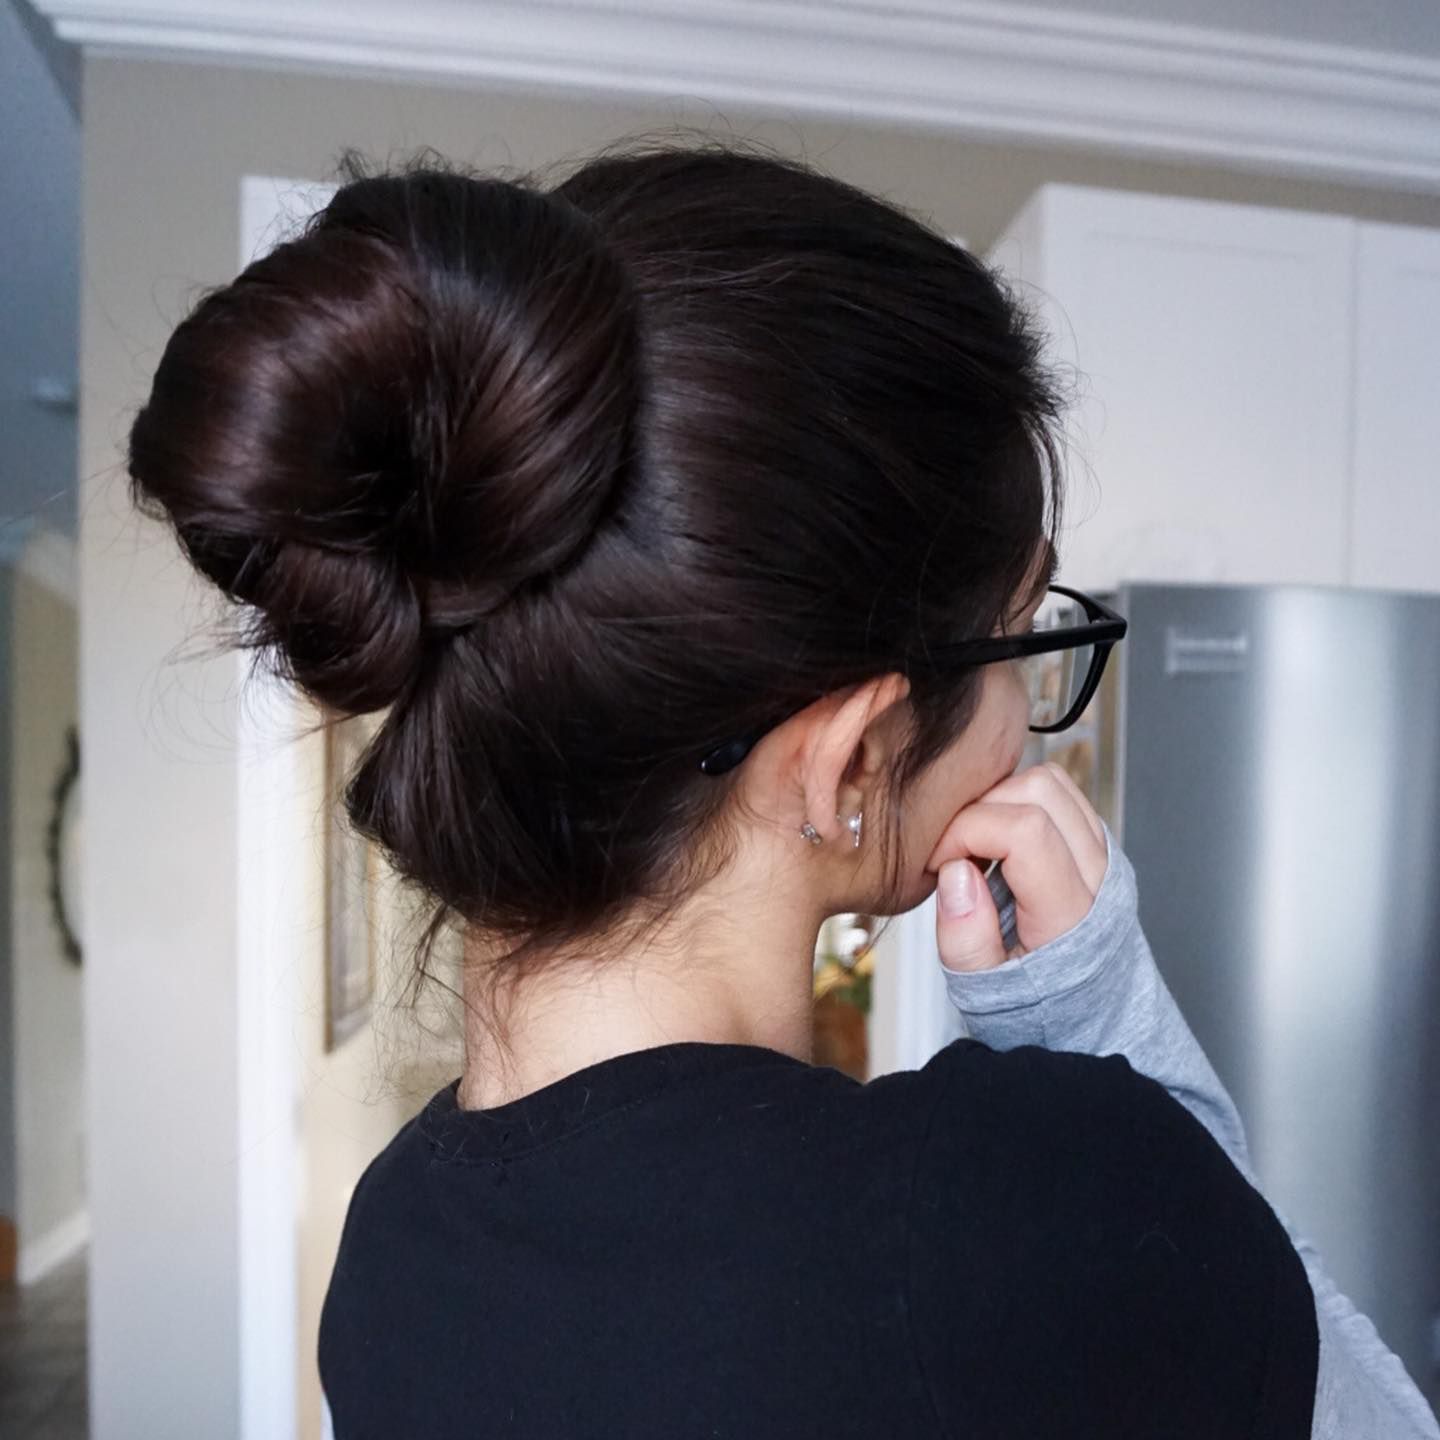 Trendy Relaxed Long Hair Bun Throughout 37 Long Hair Styles That Are Quick, Easy, And On Trend In  (View 11 of 15)